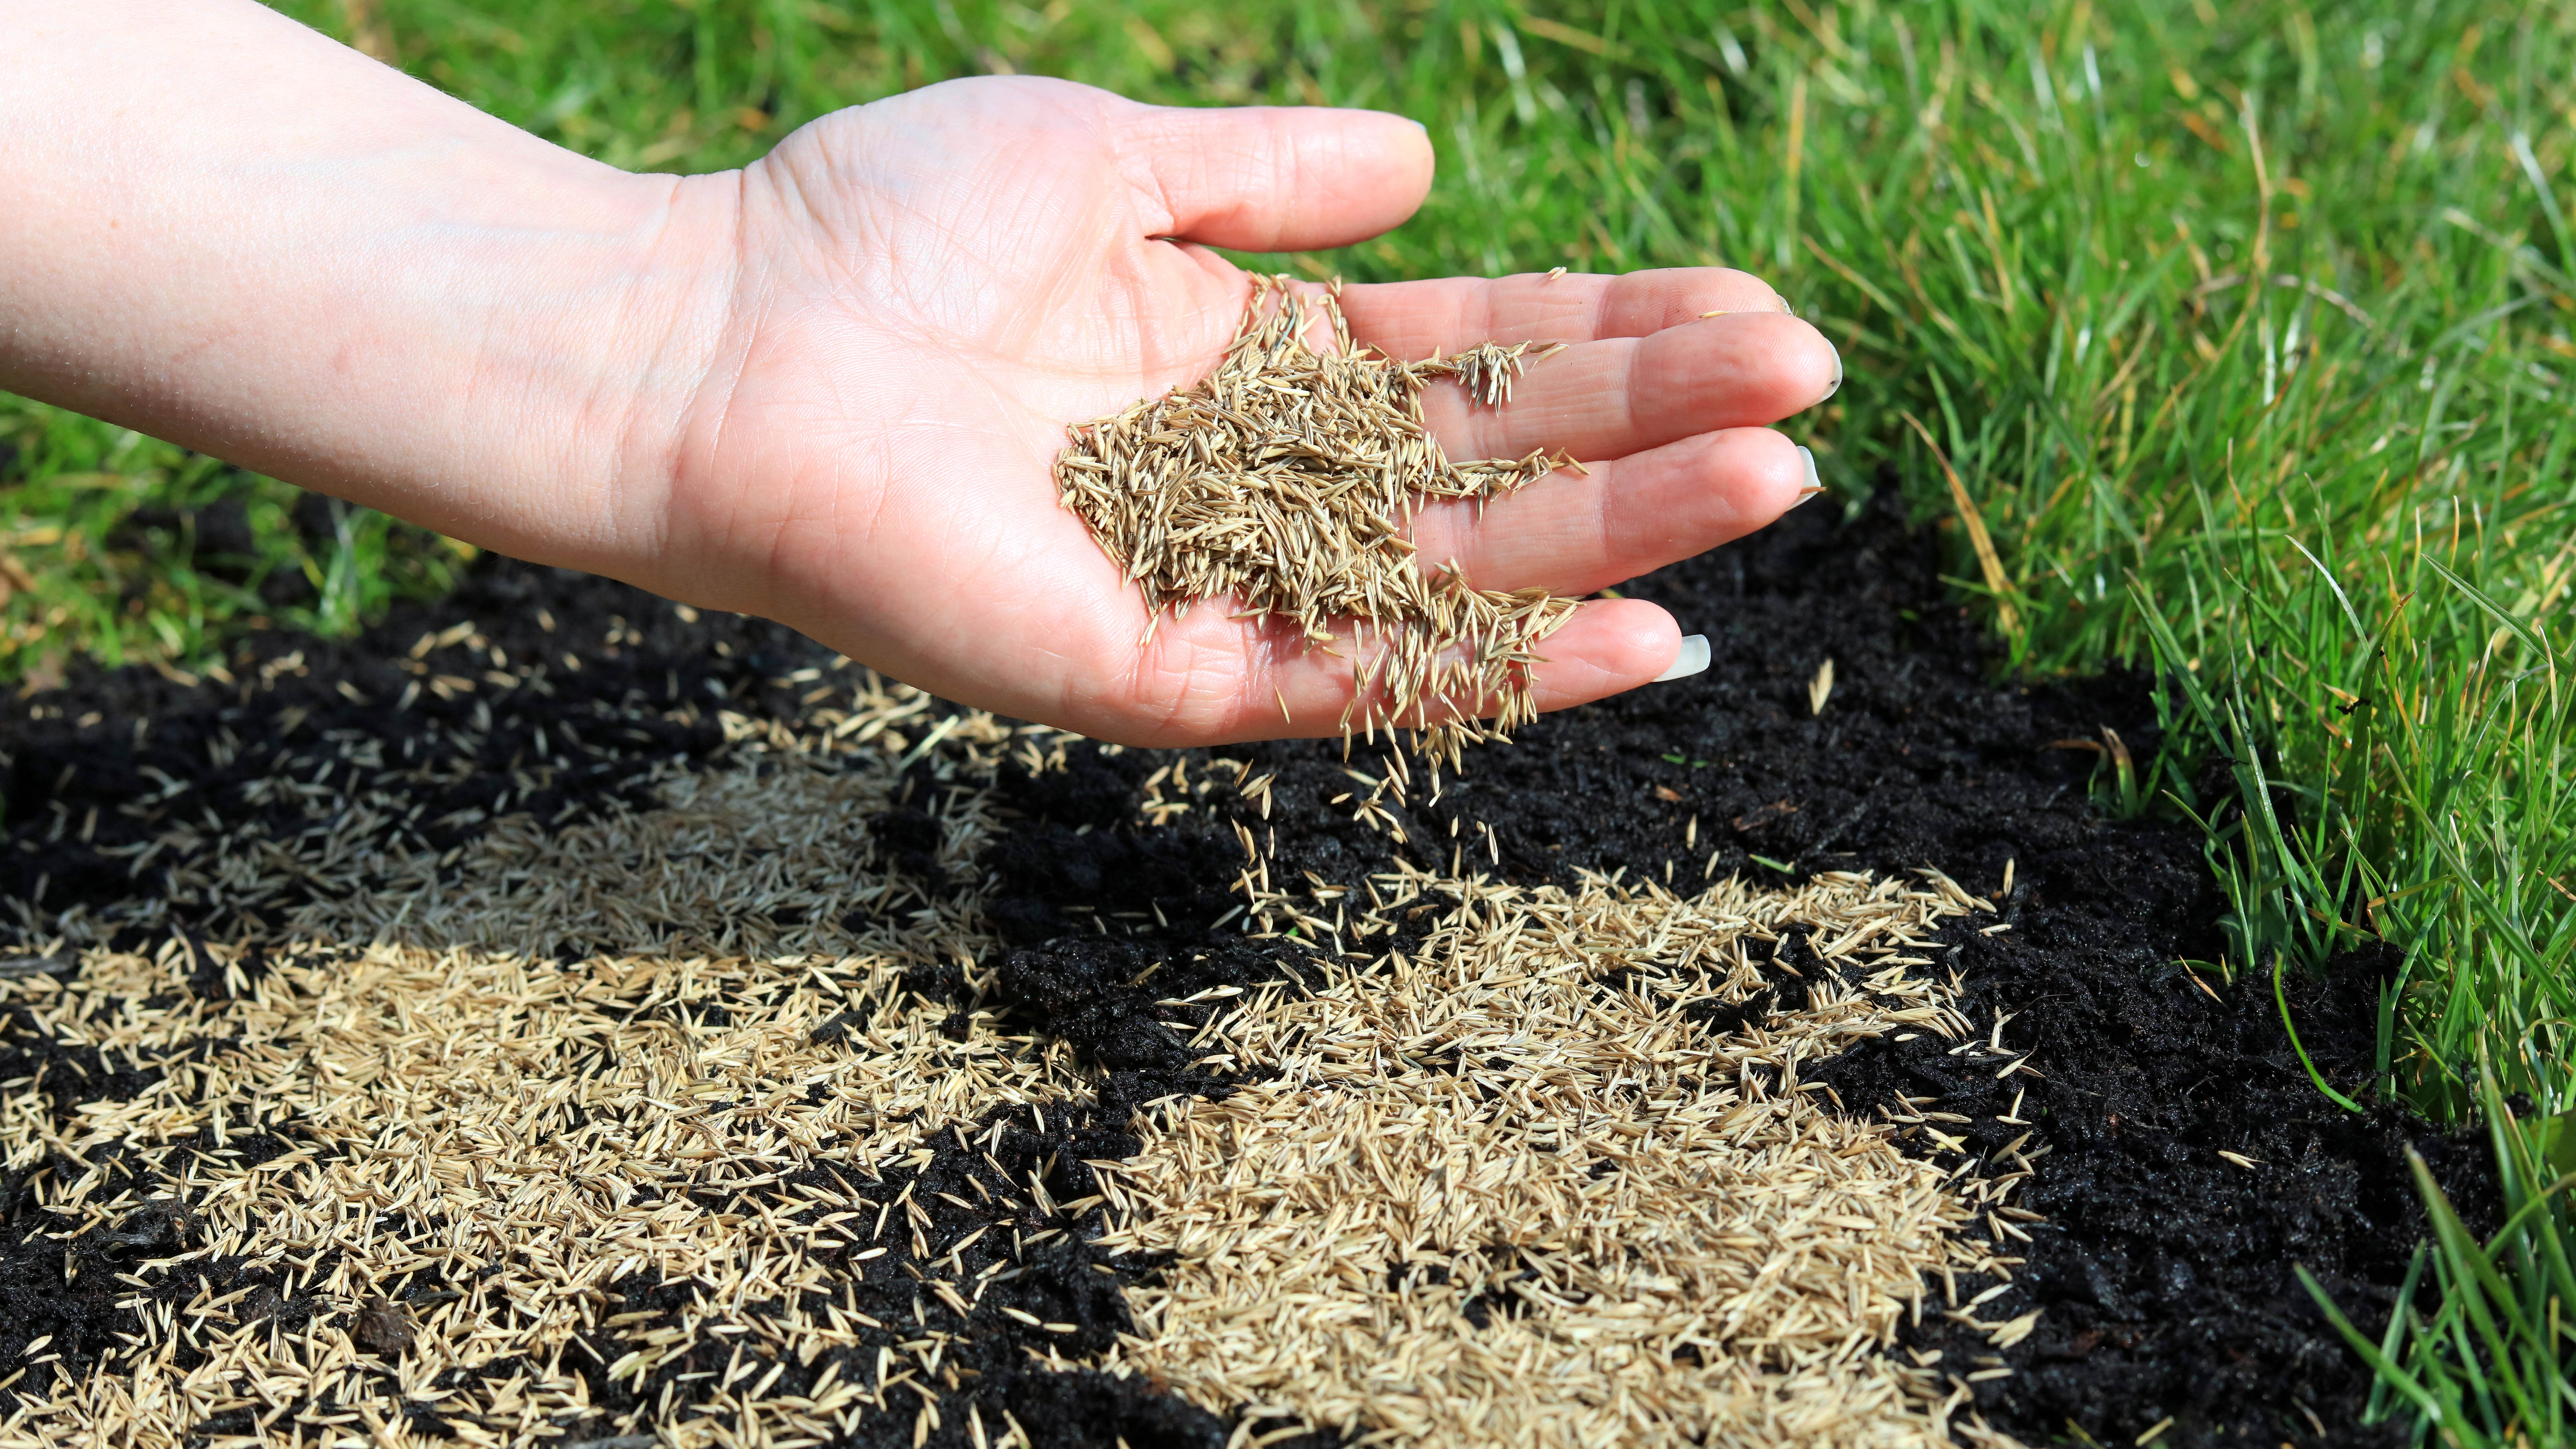 how to plant grass seed and get a greener yard | tom's guide